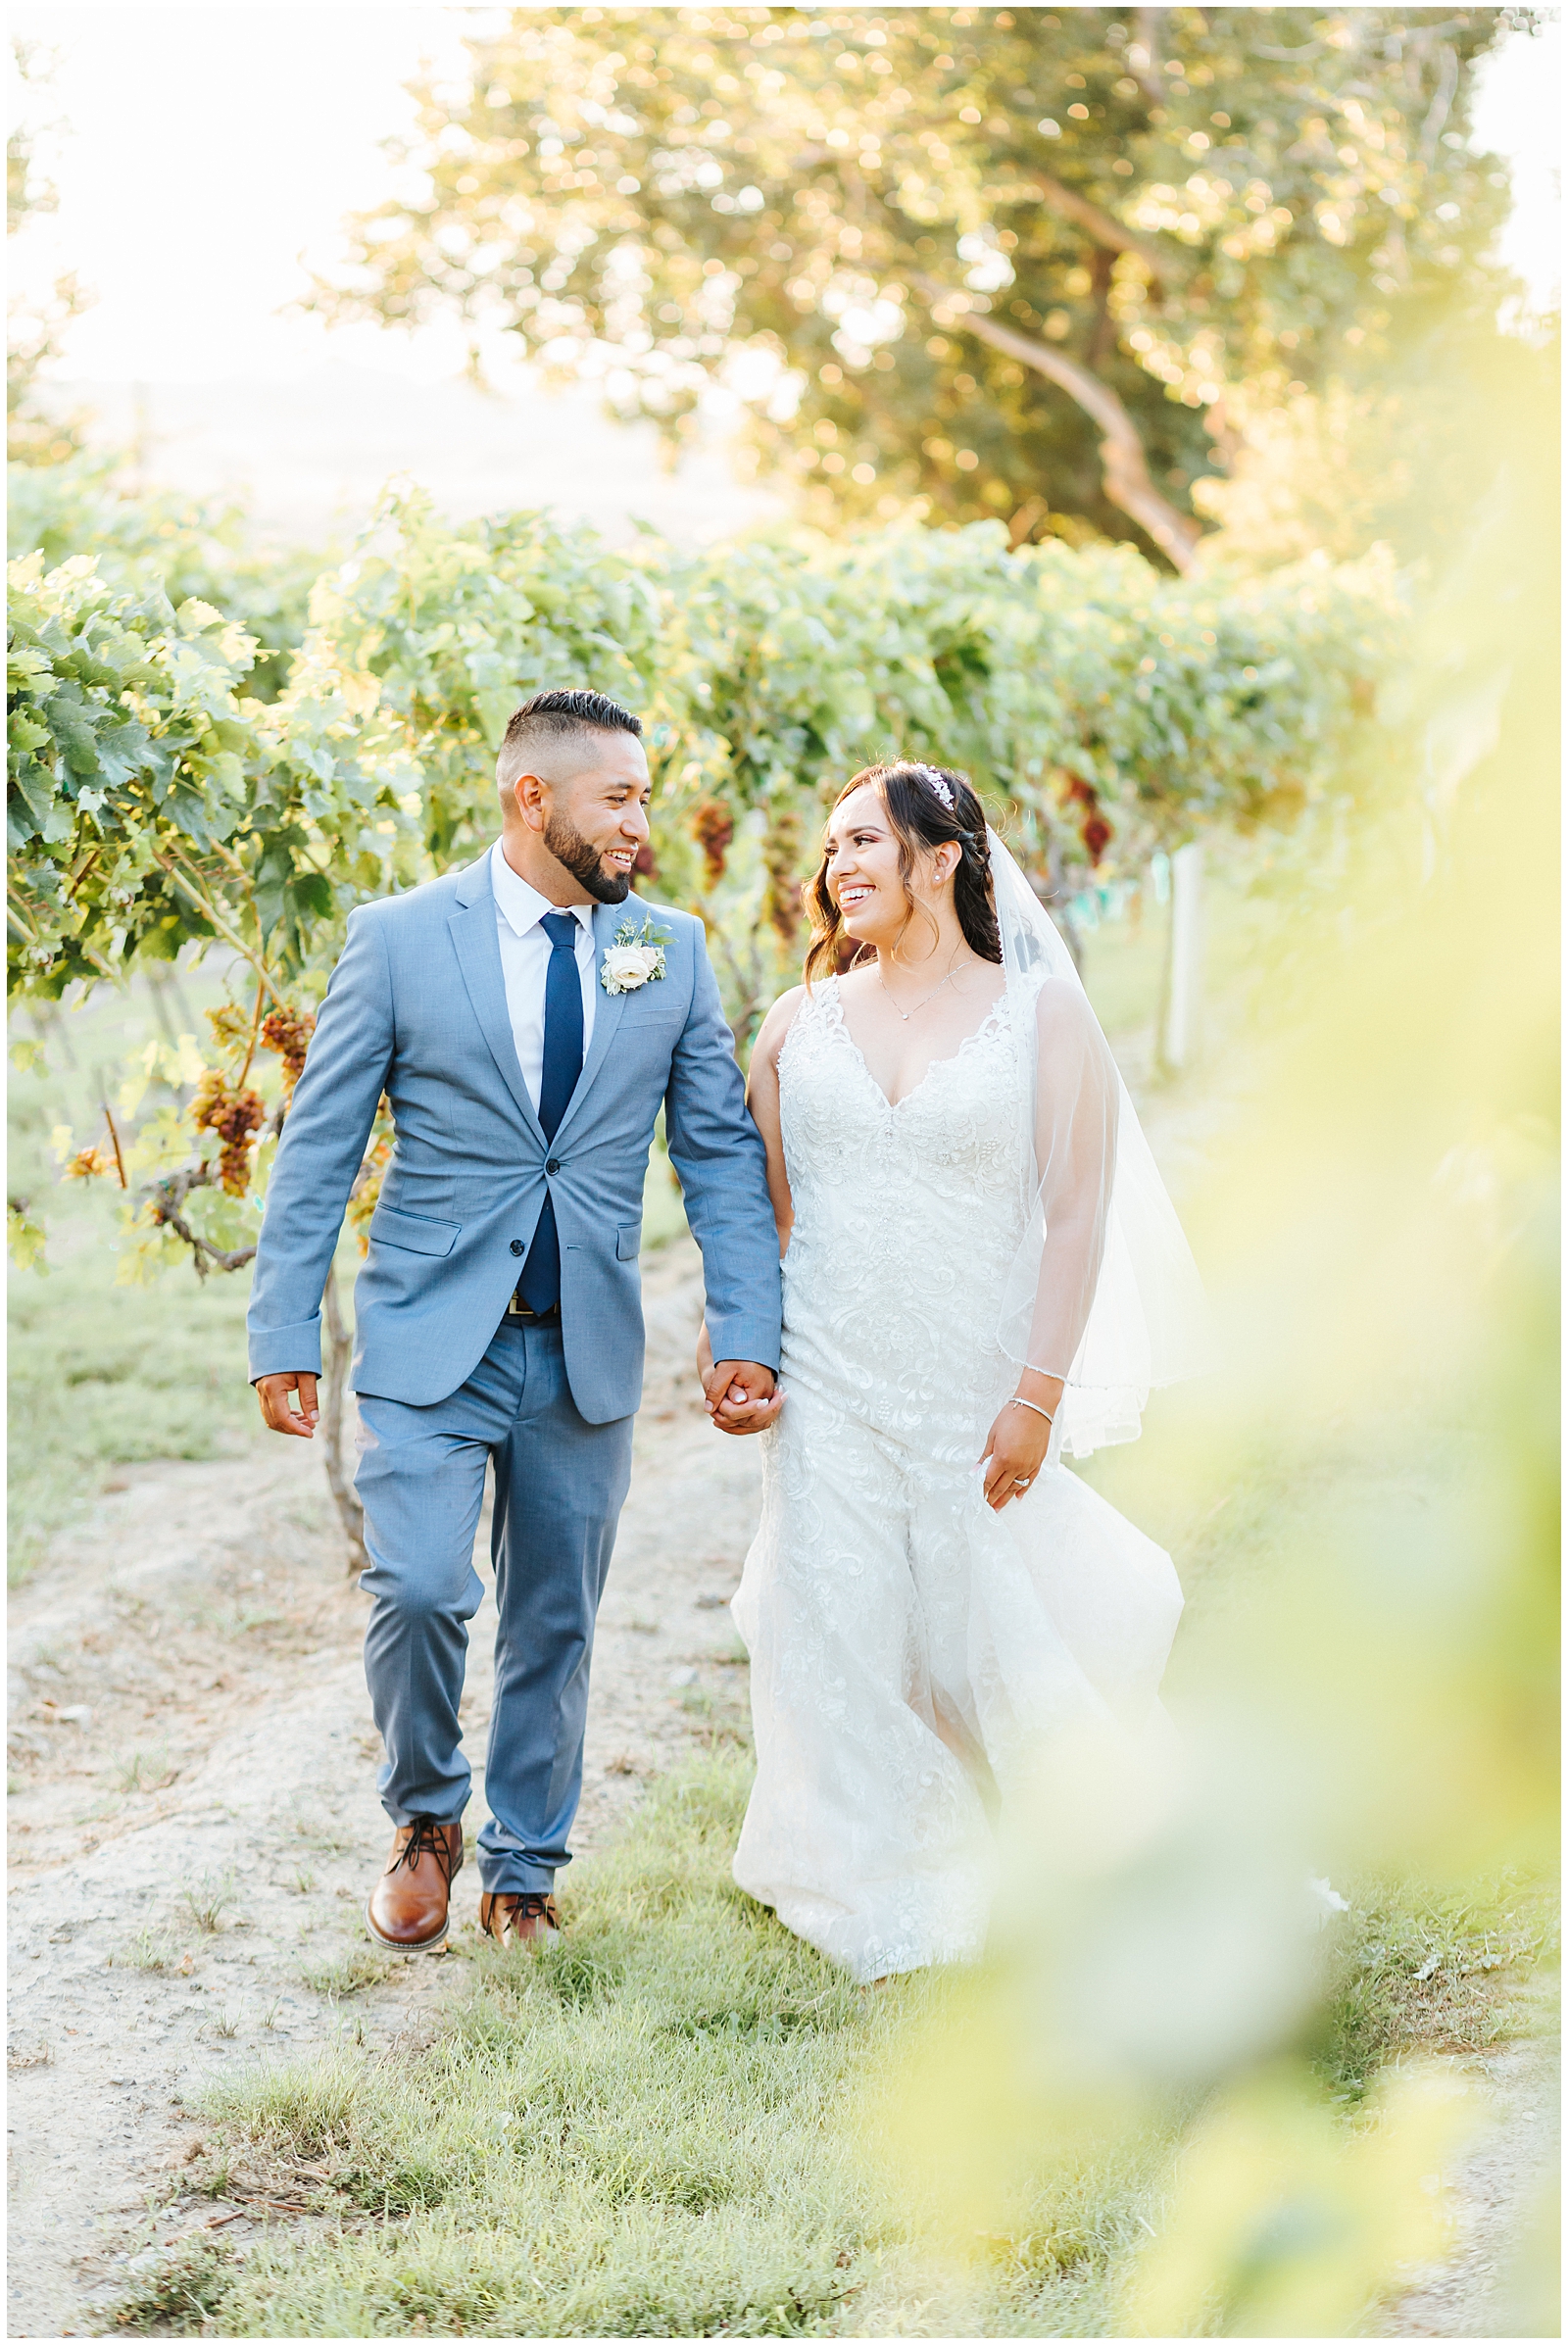 Wedding Day Posing - Couple Walking and Smiling at Each other in the Vineyards